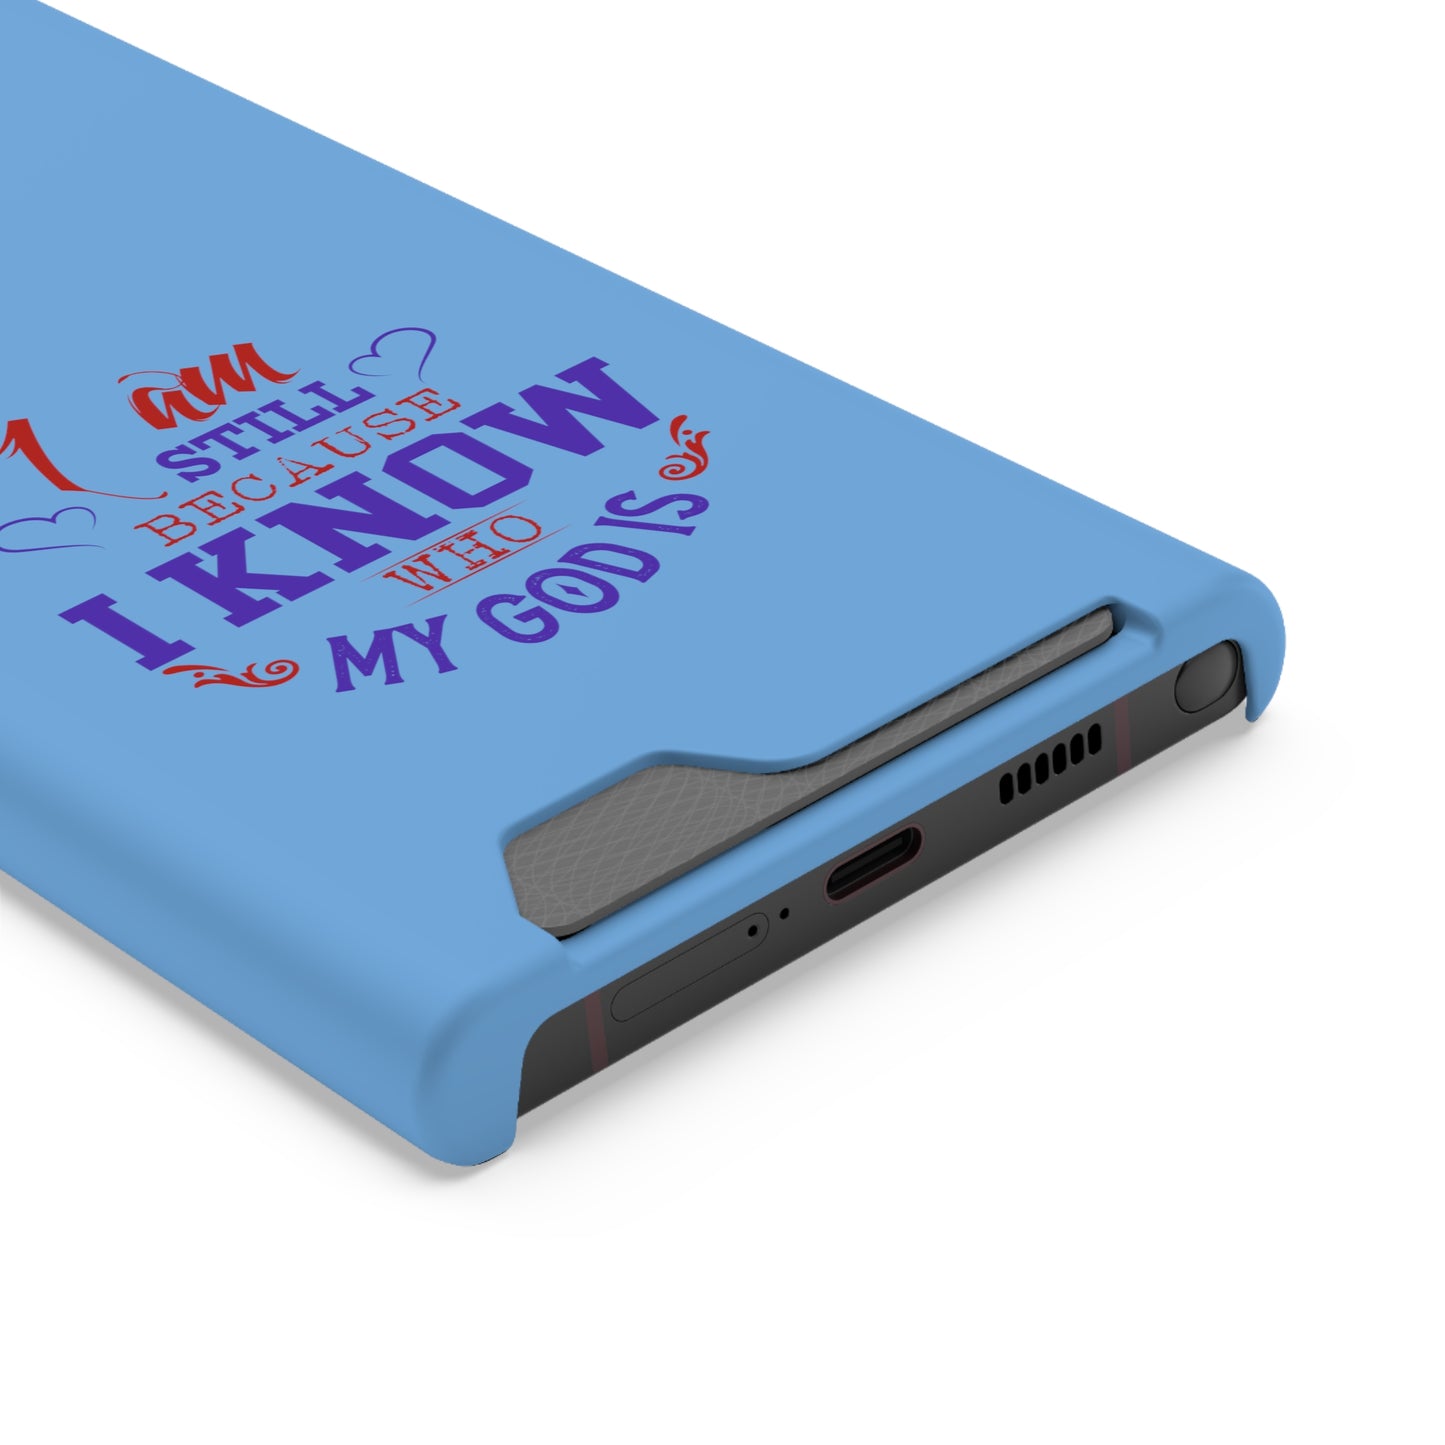 I Am Still Because I Know Who My God Is Phone Case With Card Holder